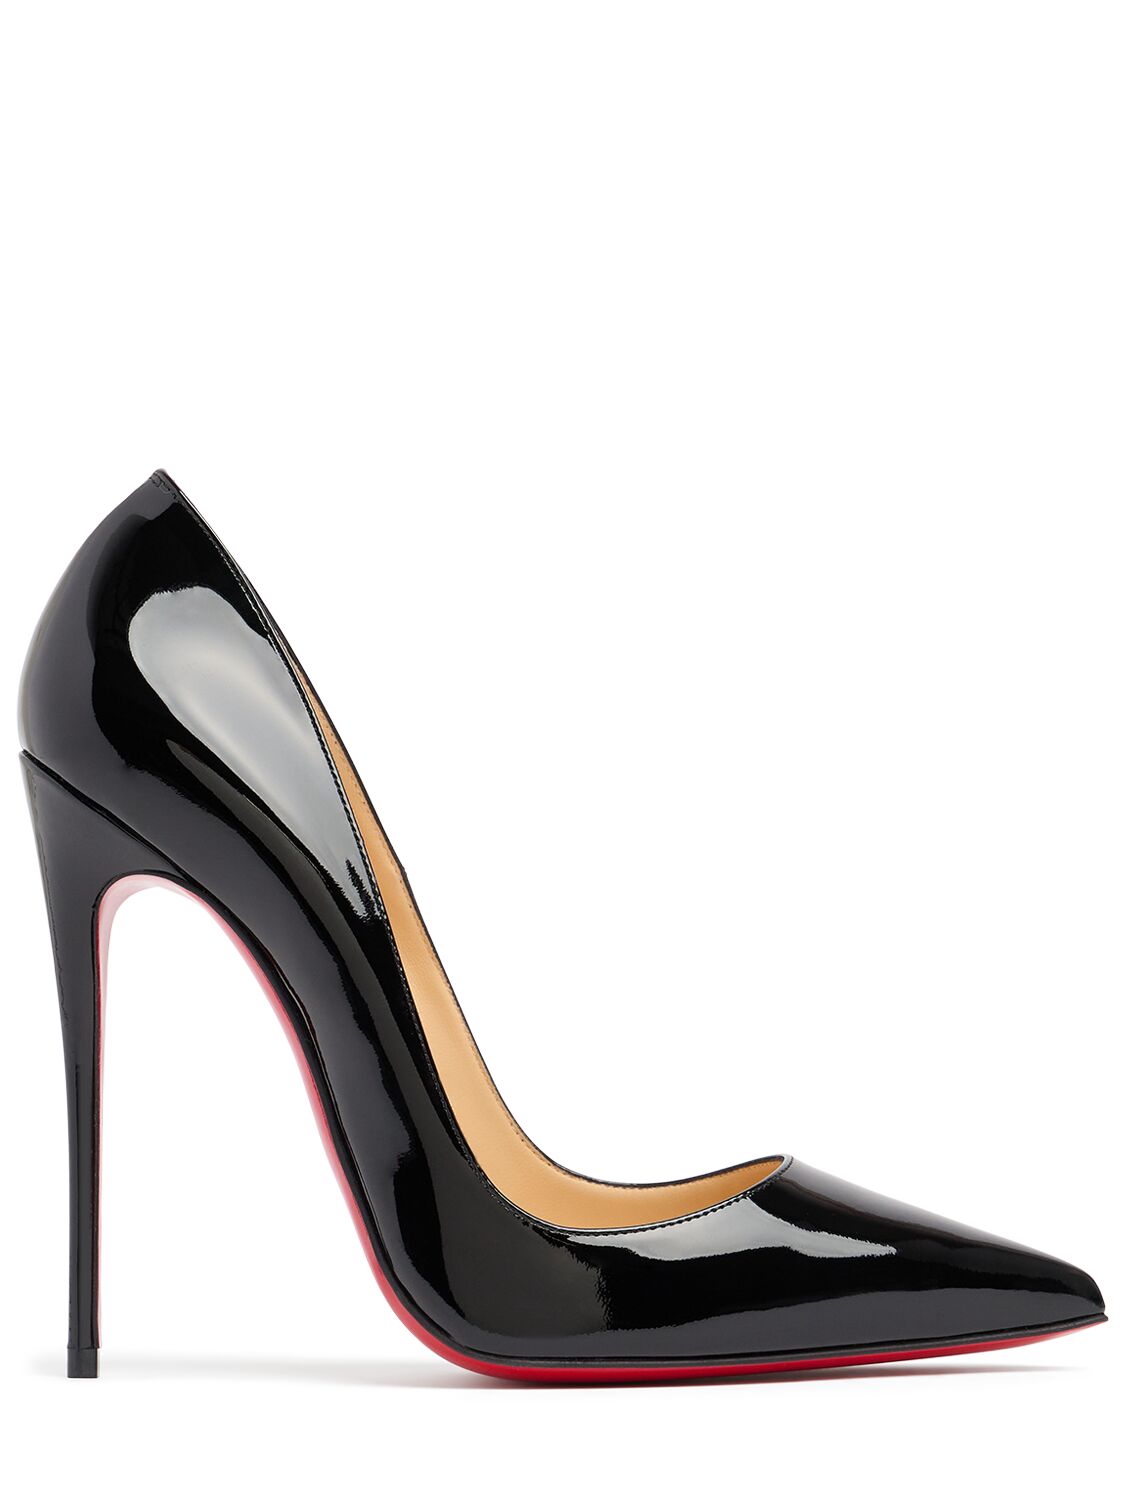 120mm So Kate Patent Leather Pumps